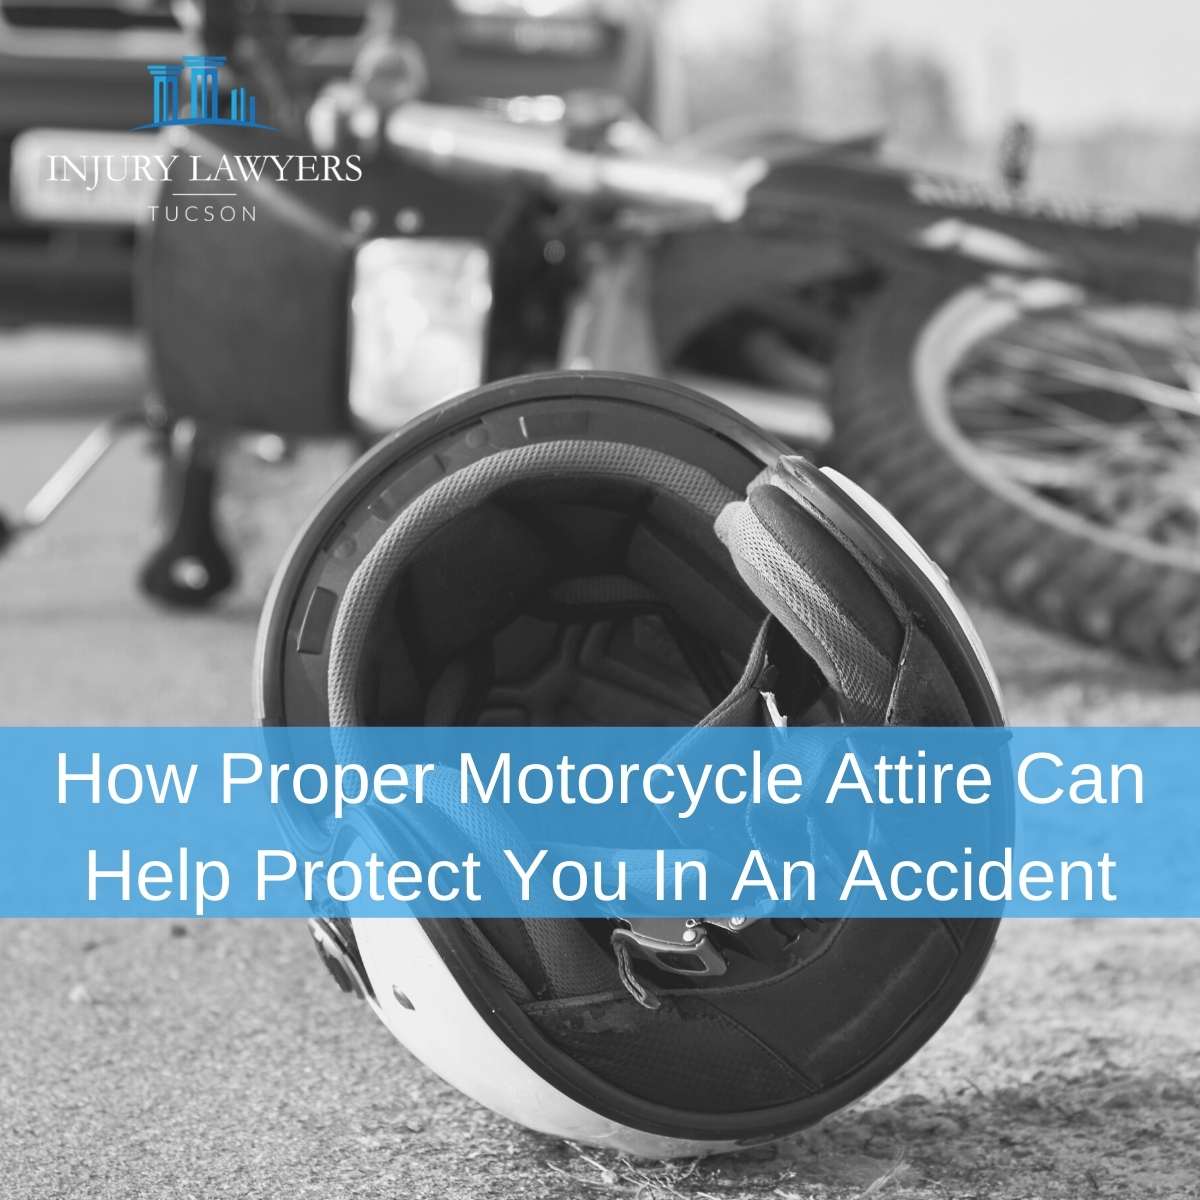 How Proper Motorcycle Attire Can Help Protect You In An Accident